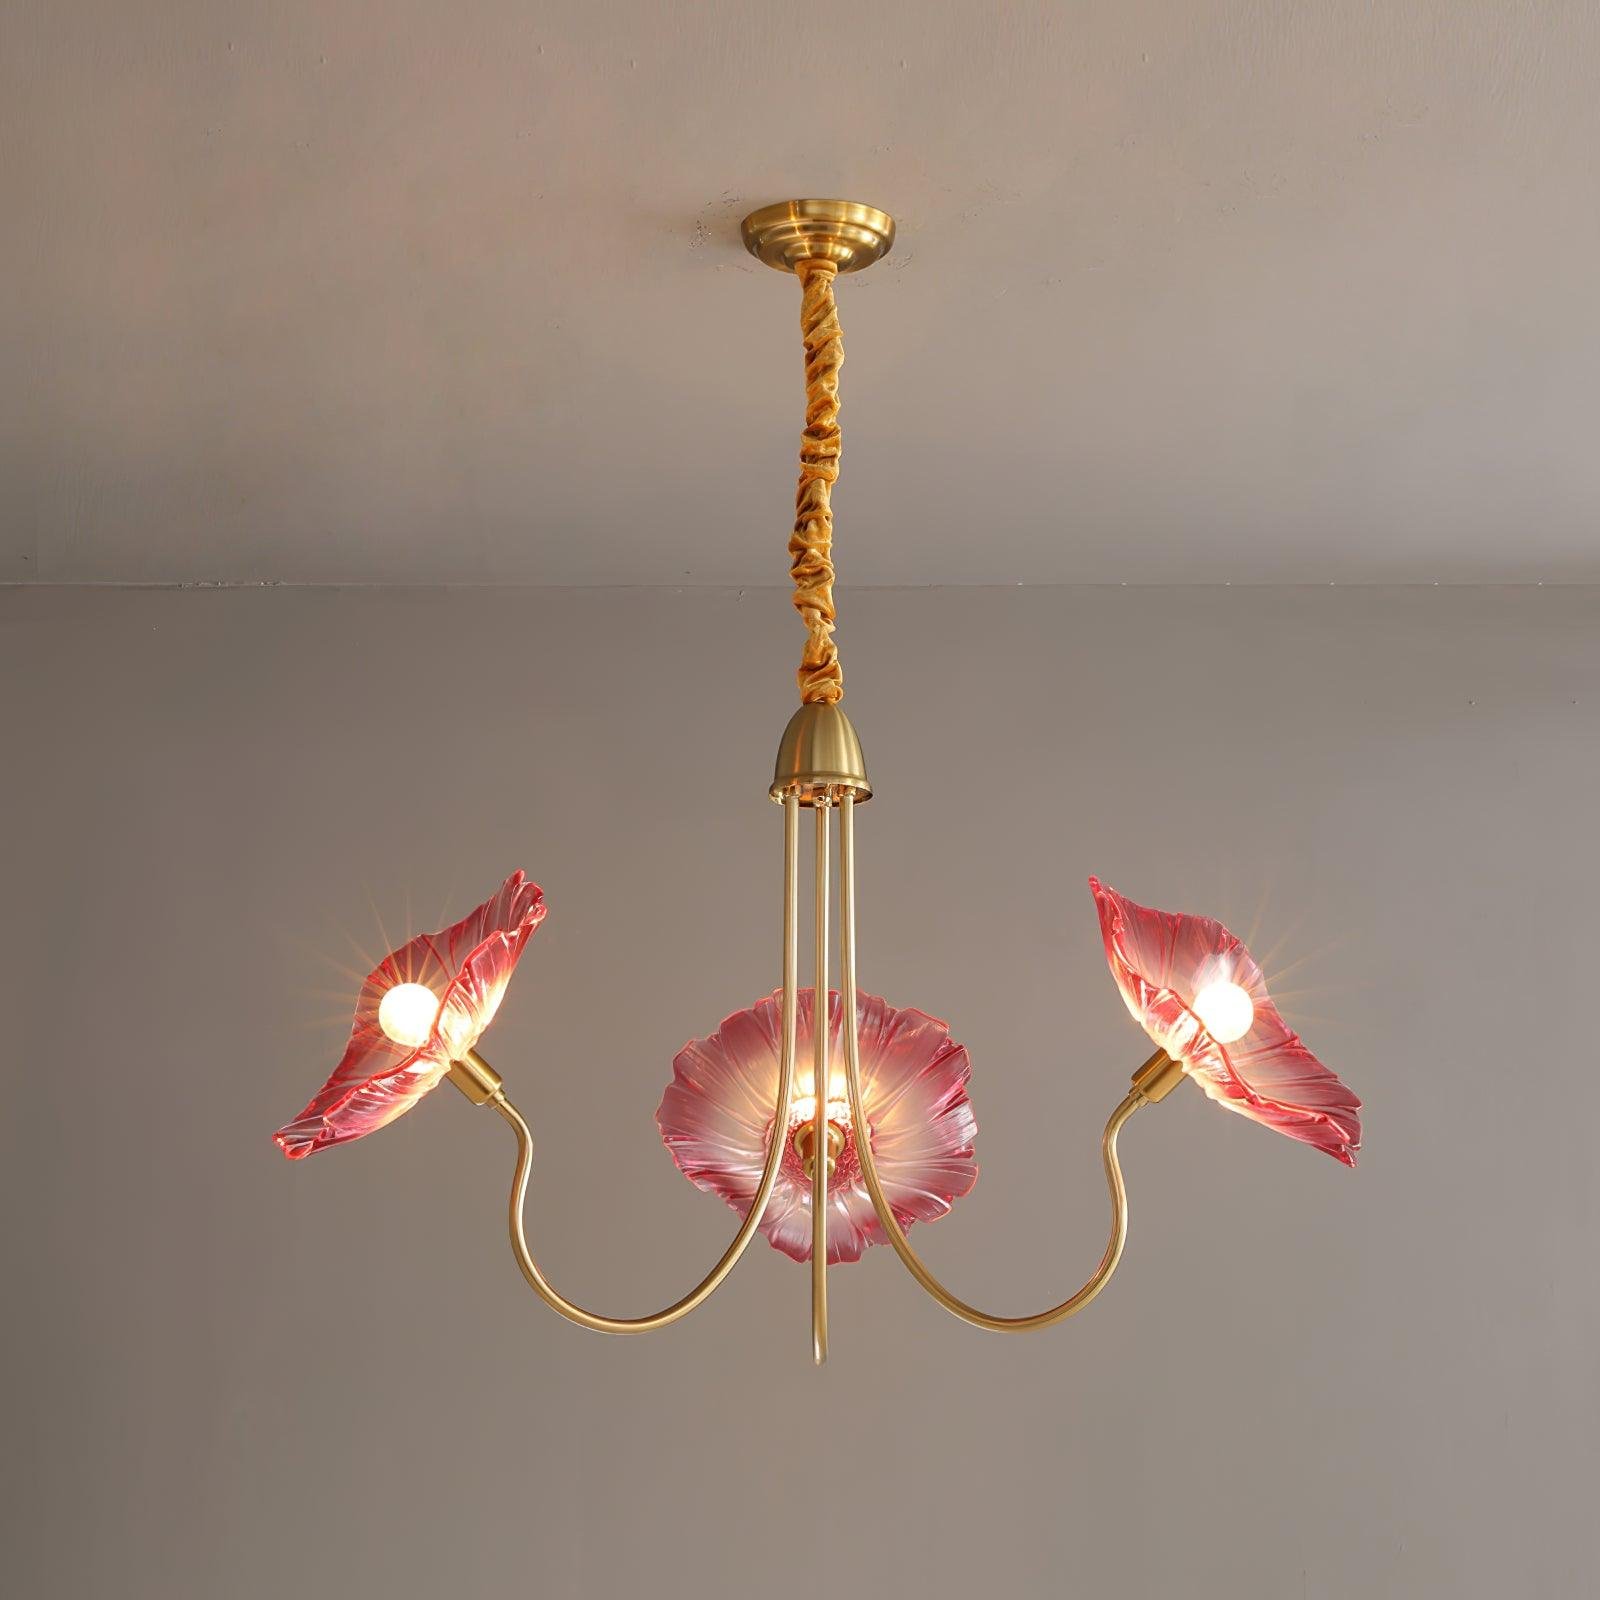 3-Head Lotus Leaf Glass Chandelier in Gold and Pink, measuring 35.4" in diameter and 21.7" in height (90cm x 55cm)